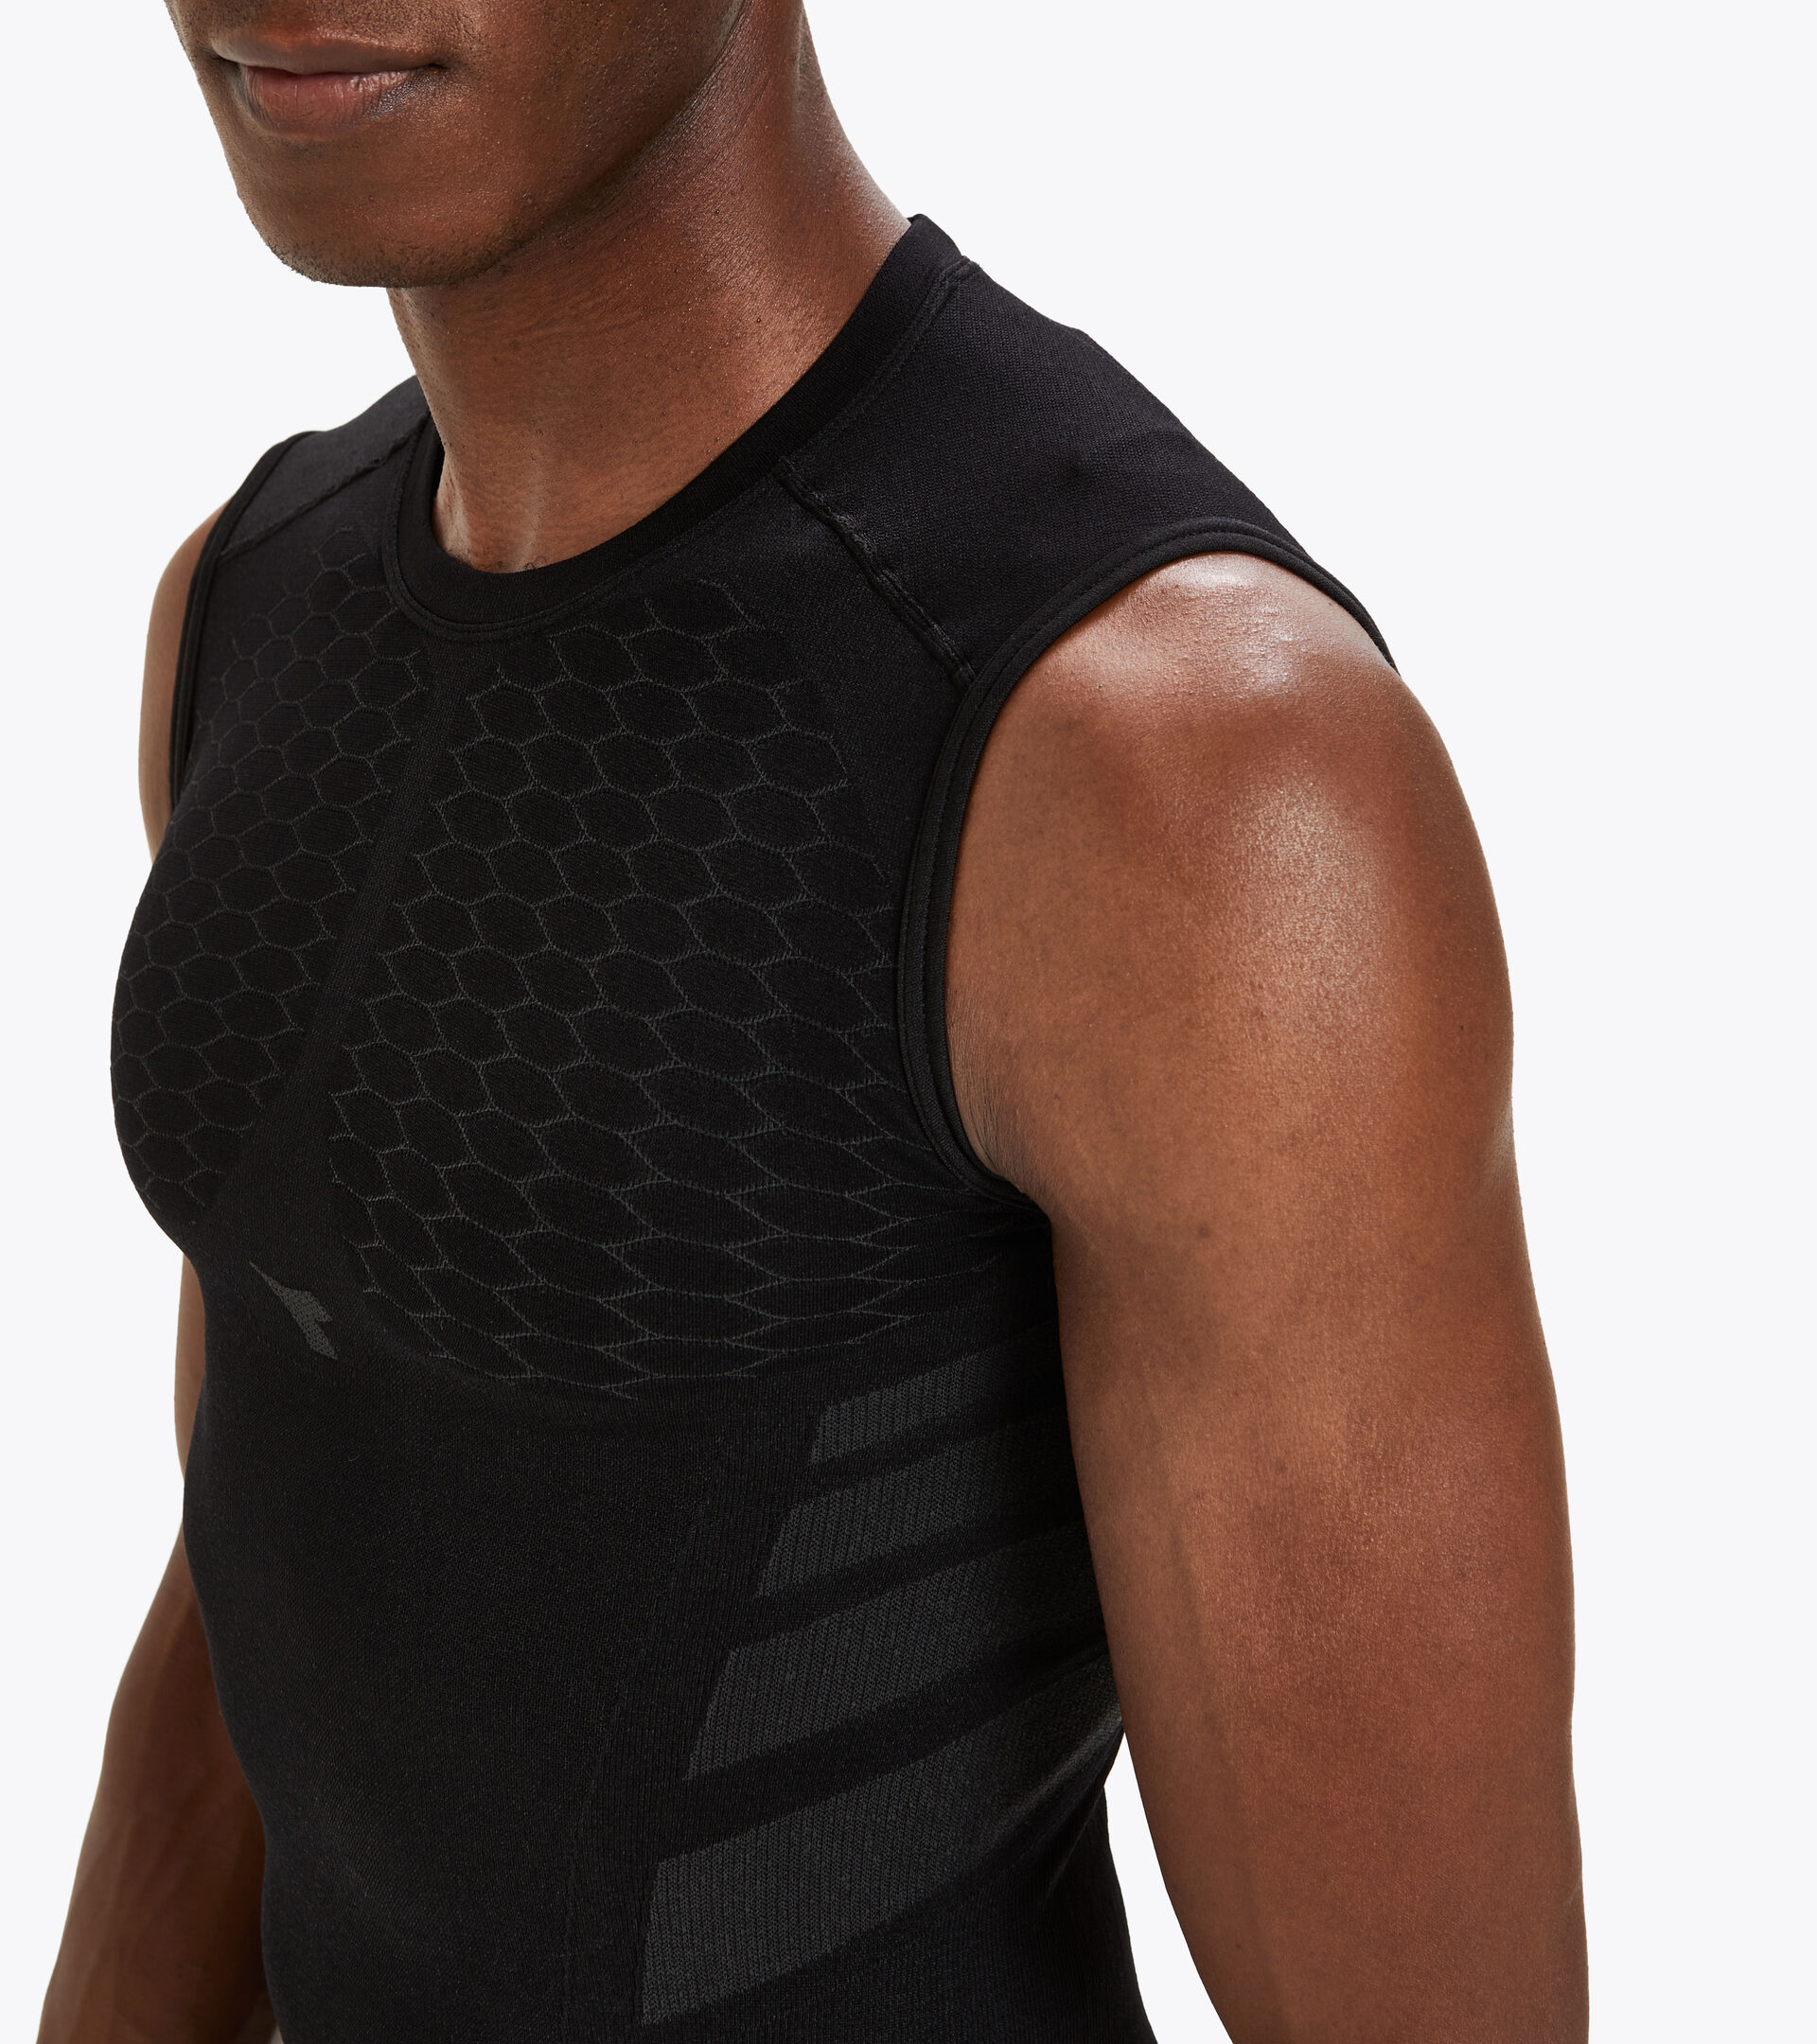 Nike Compression T Shirt Tank Tops for Men